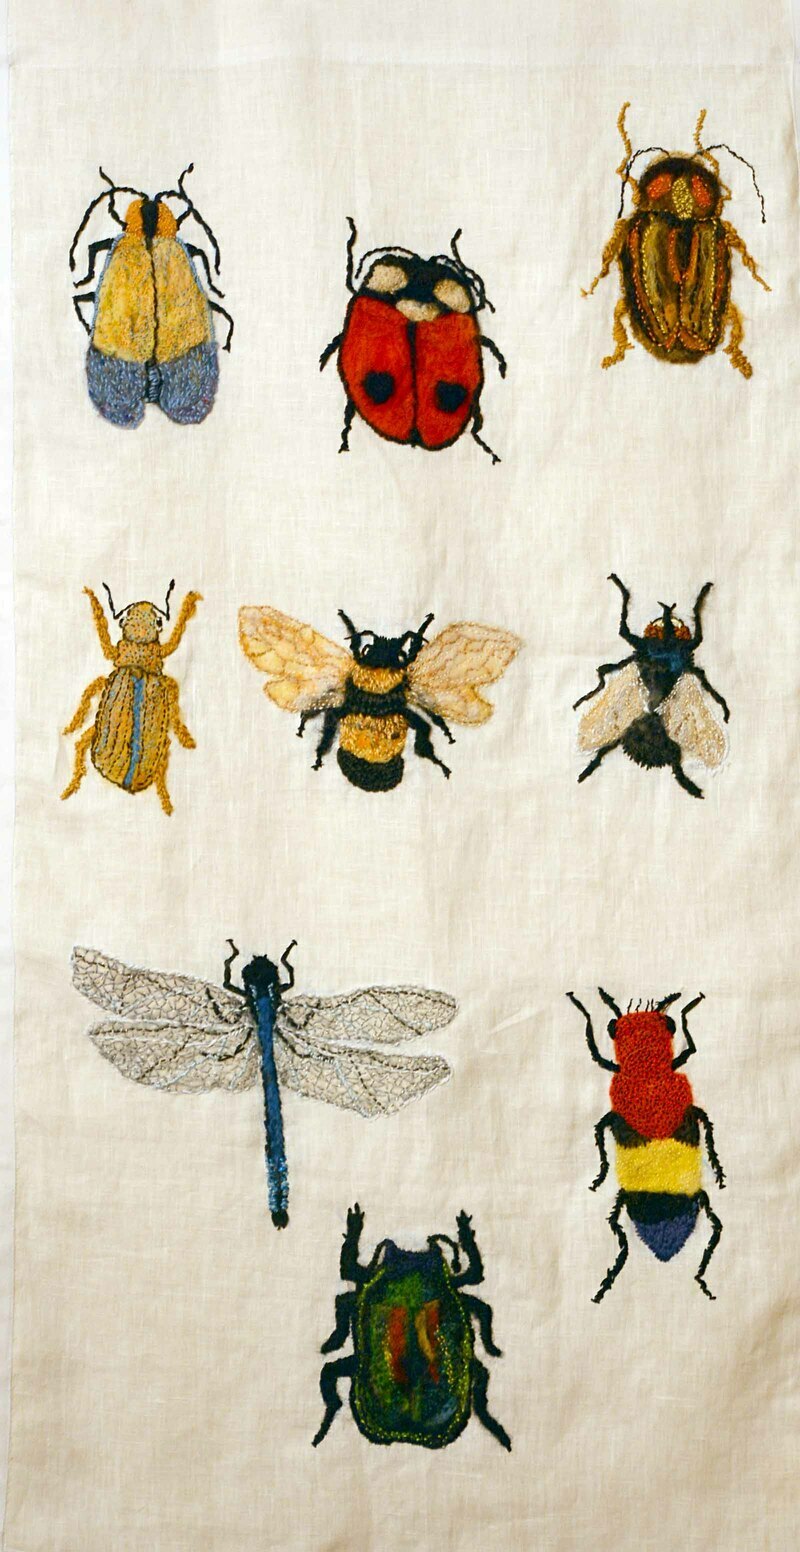 Bug sampler by Rebecca Dufton, 21 x 40 inches, needlefelt and handstitching on linen